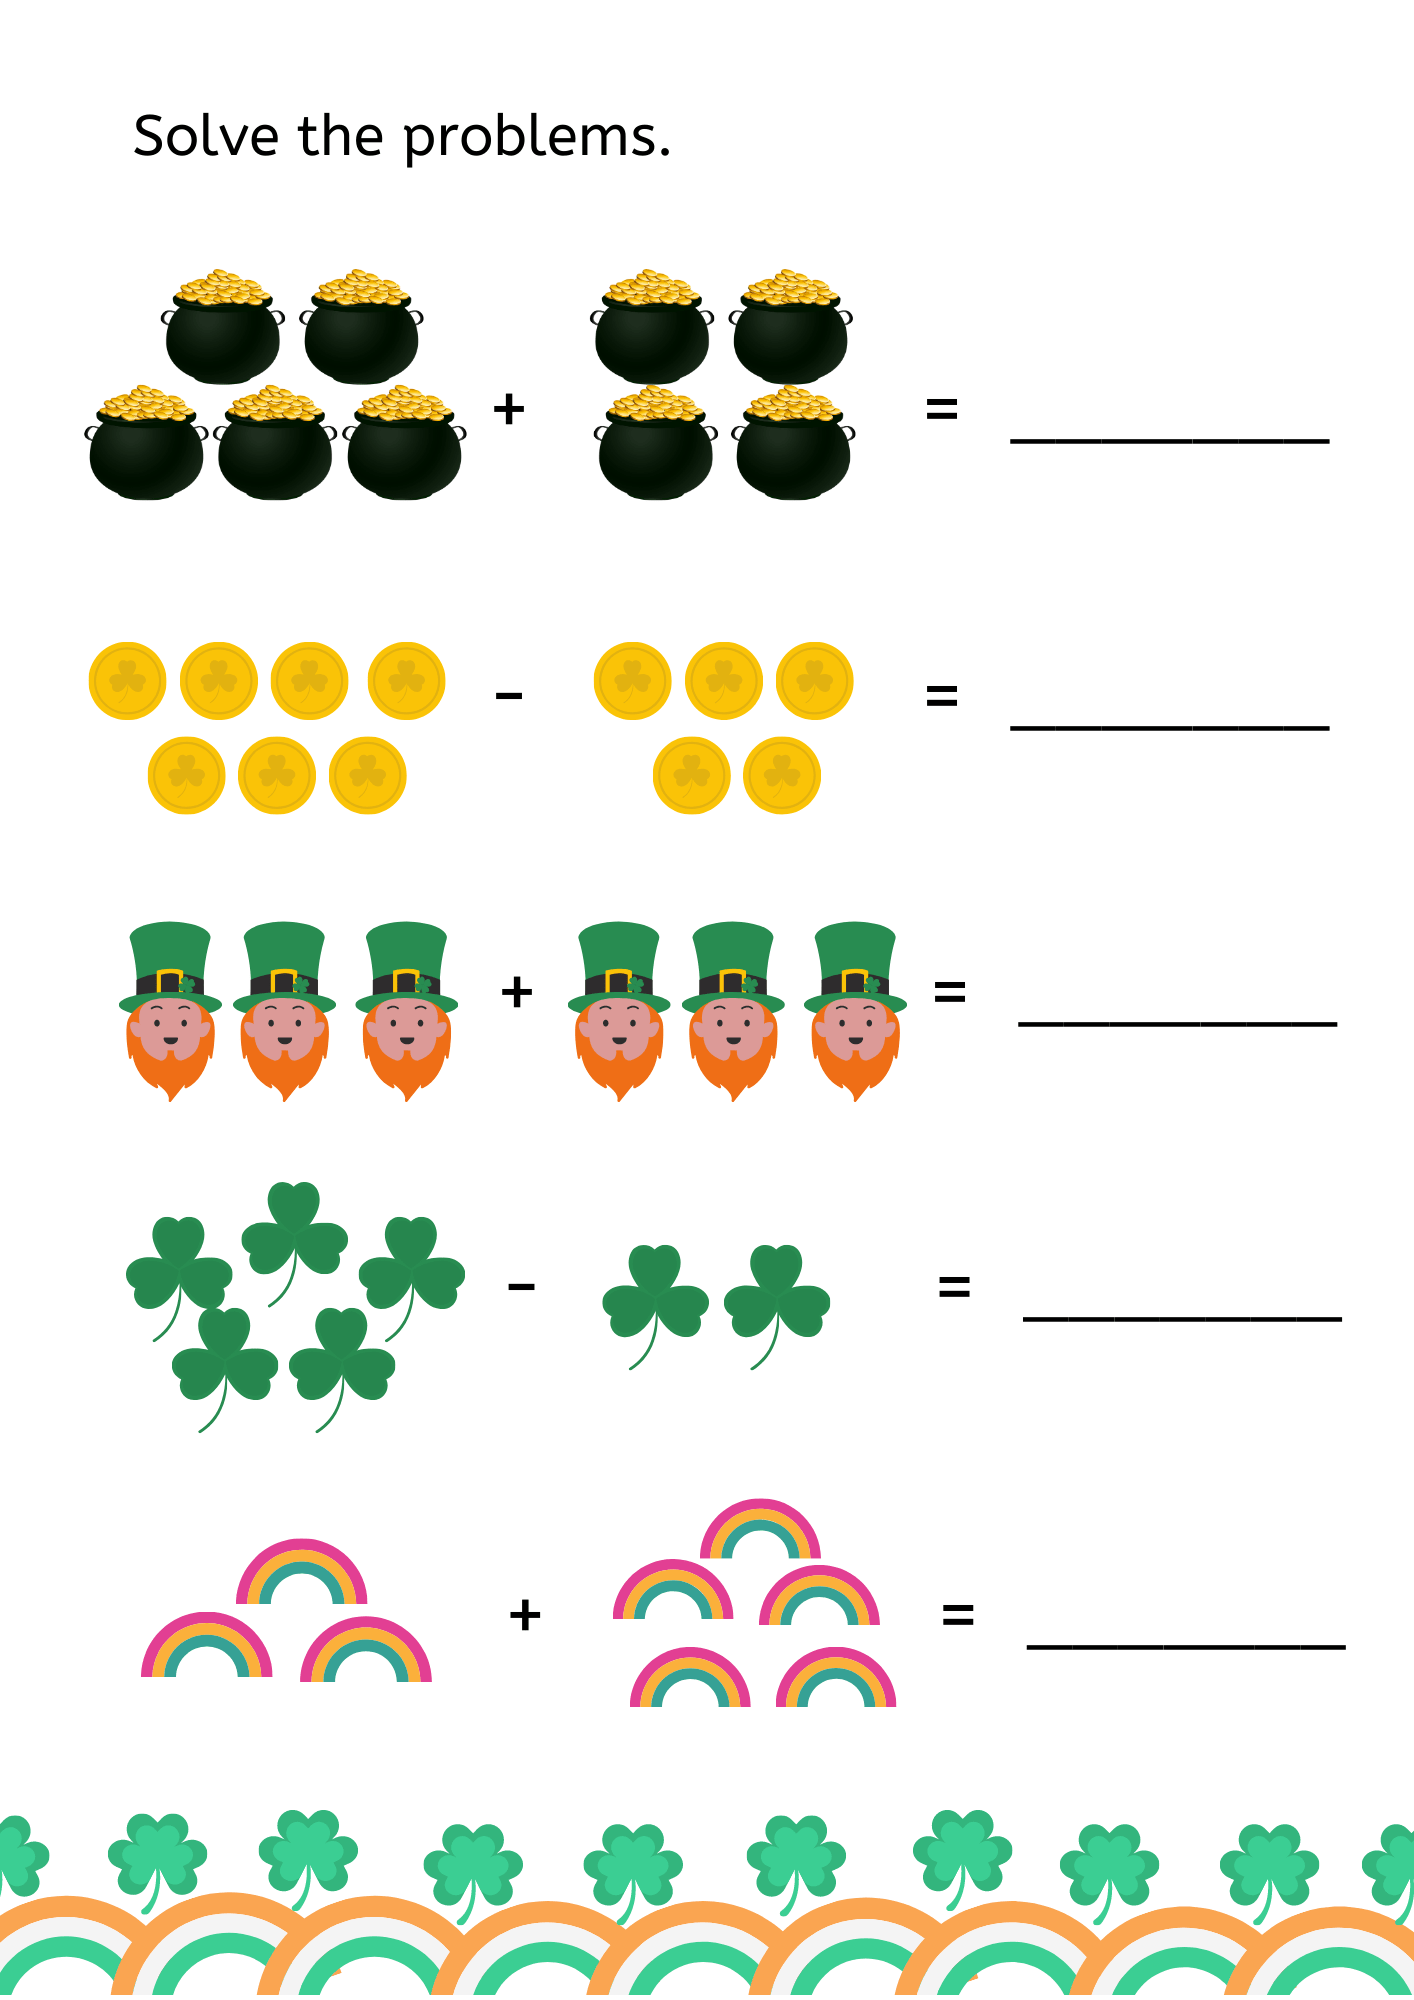 st-patrick-s-day-activities-st-patrick-s-day-worksheets-shiningbarins